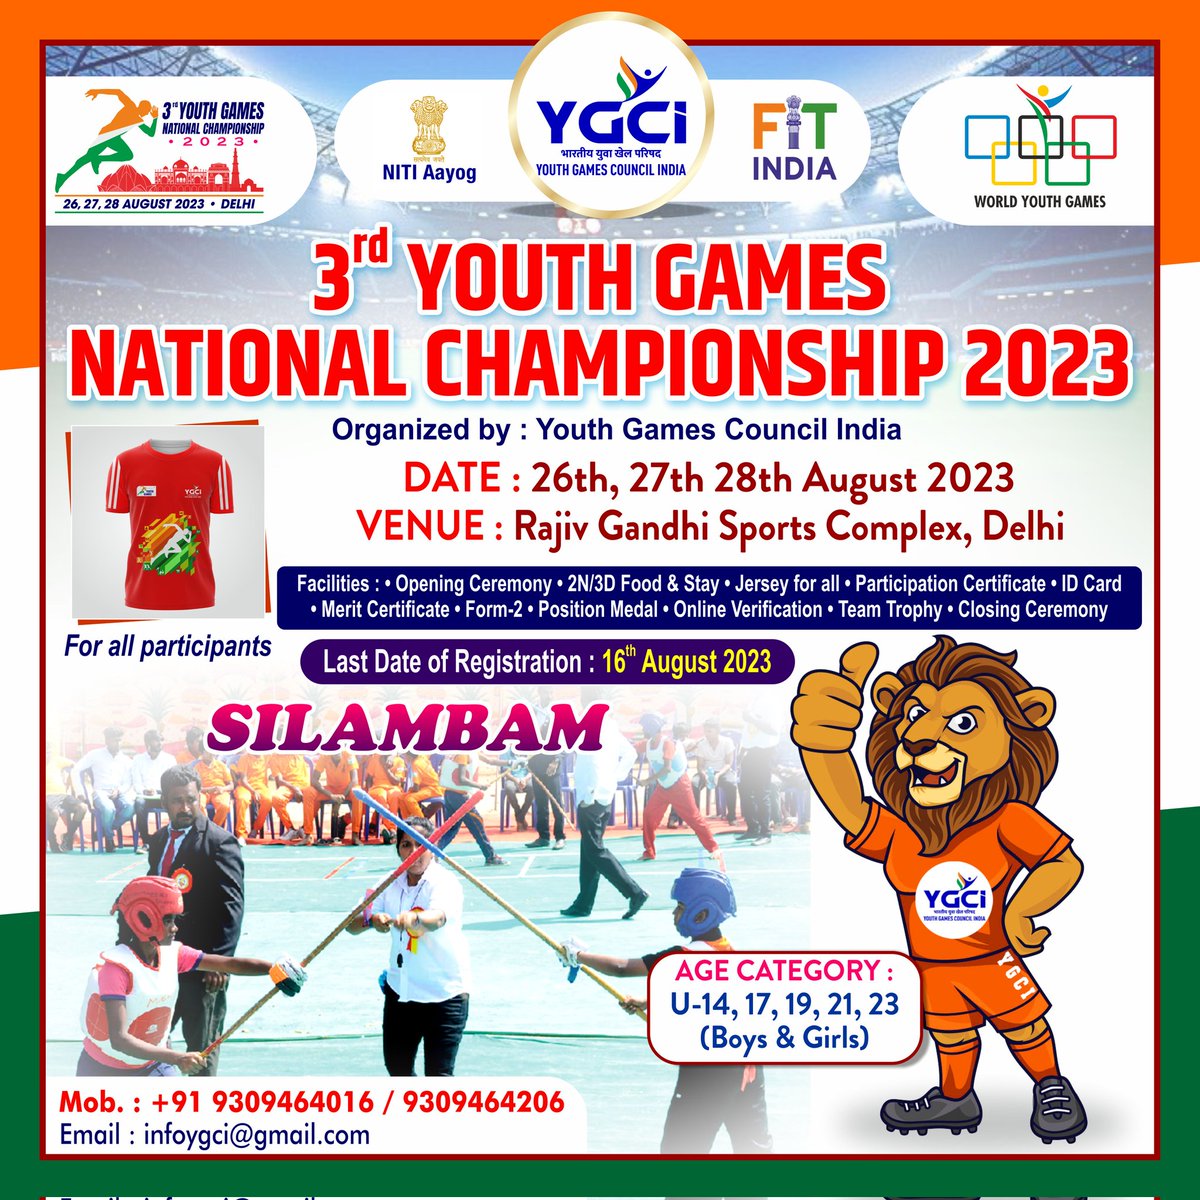 3rd Youth Games National Championship 2023🏆
🔹Organized by: Youth Games Council India
📍Date: 26, 27, 28 August 2023
🏟️Venue: Rajiv Gandhi Sports Complex, DELHI
📱 Contact:- +91 9309464016 / 9309464206
#ygci #youthgamesnationalchampionship #youthgames2023
#officialyouthgames